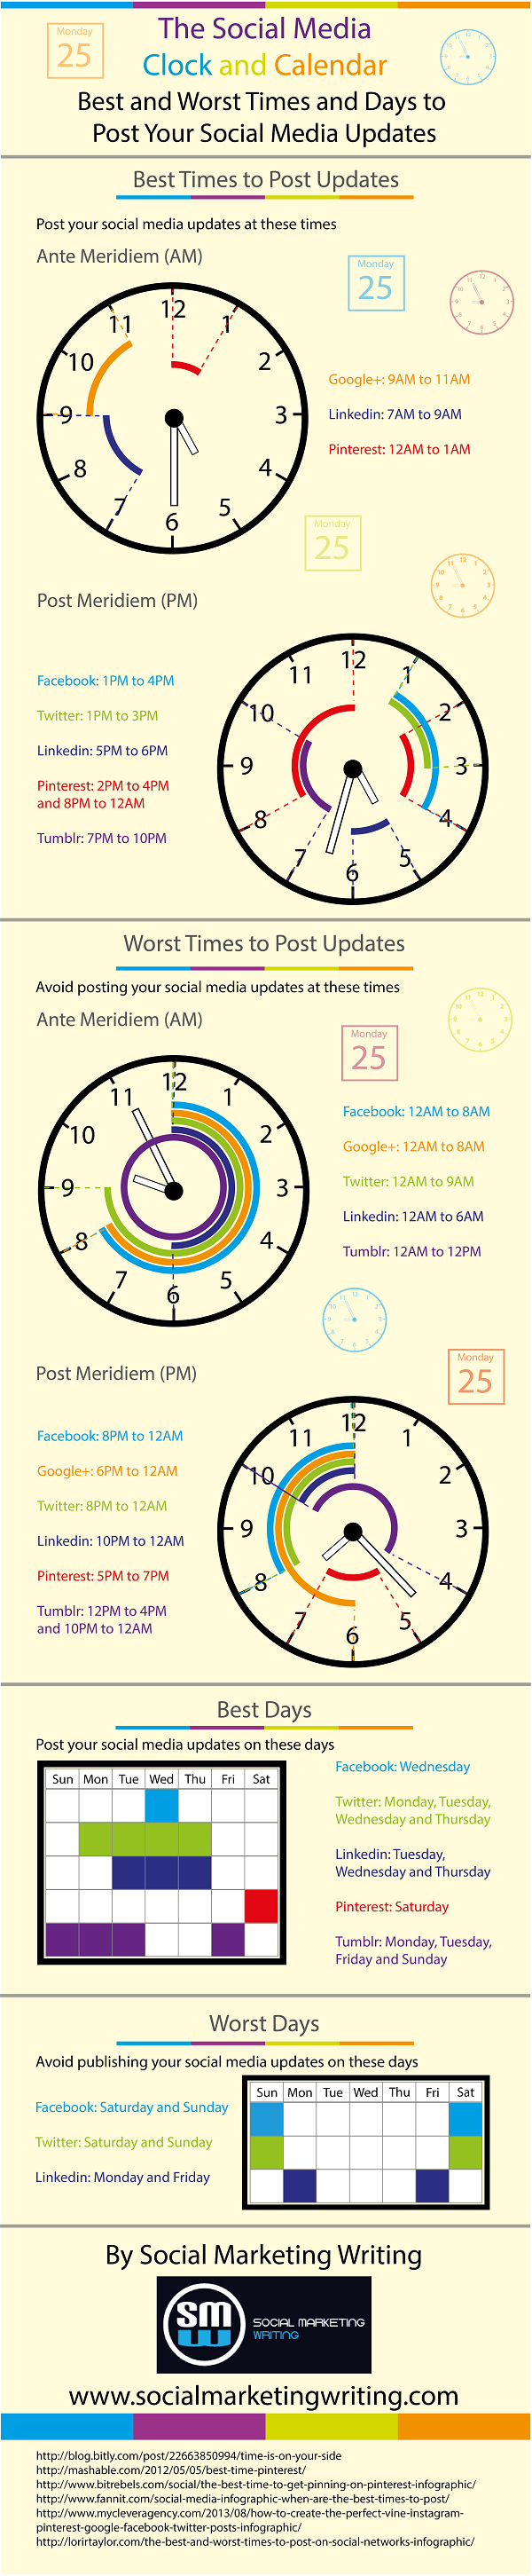 Best and Worst Times and Days to Post Your Social Media Updates [Infographic]